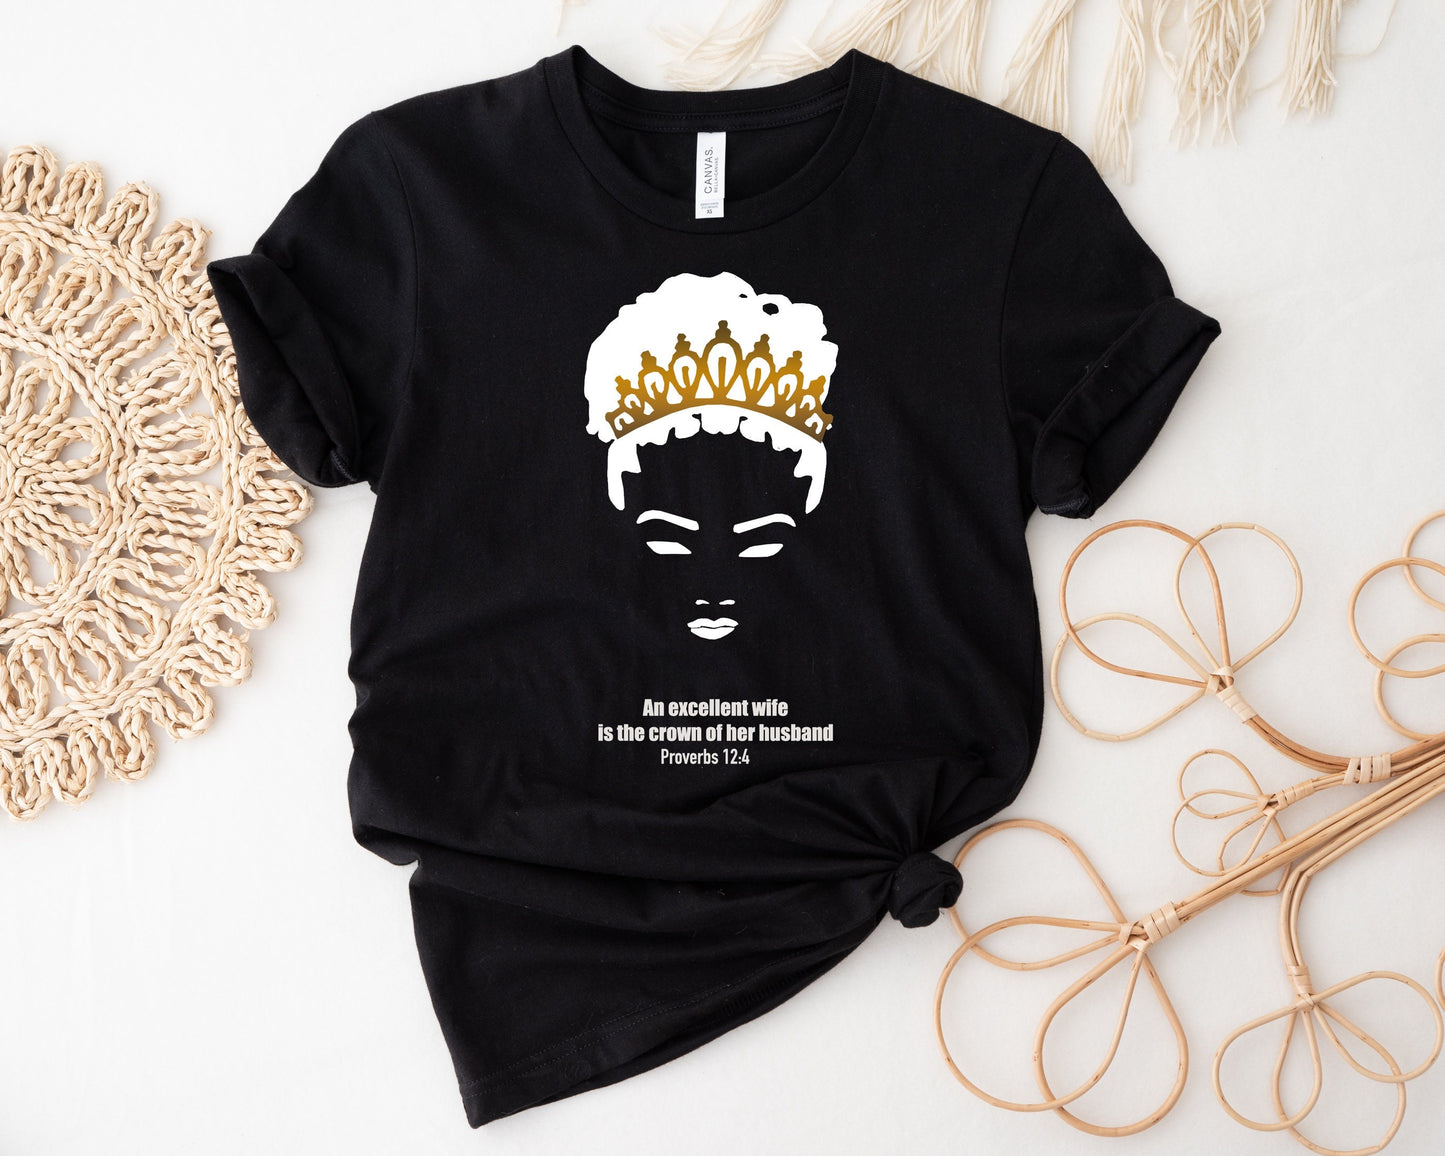 Women’s day, queen, celebrate her, King and Queen Matching Shirt for Couples, Couple Shirts, Best Couple Shirts, Lovers Shirt